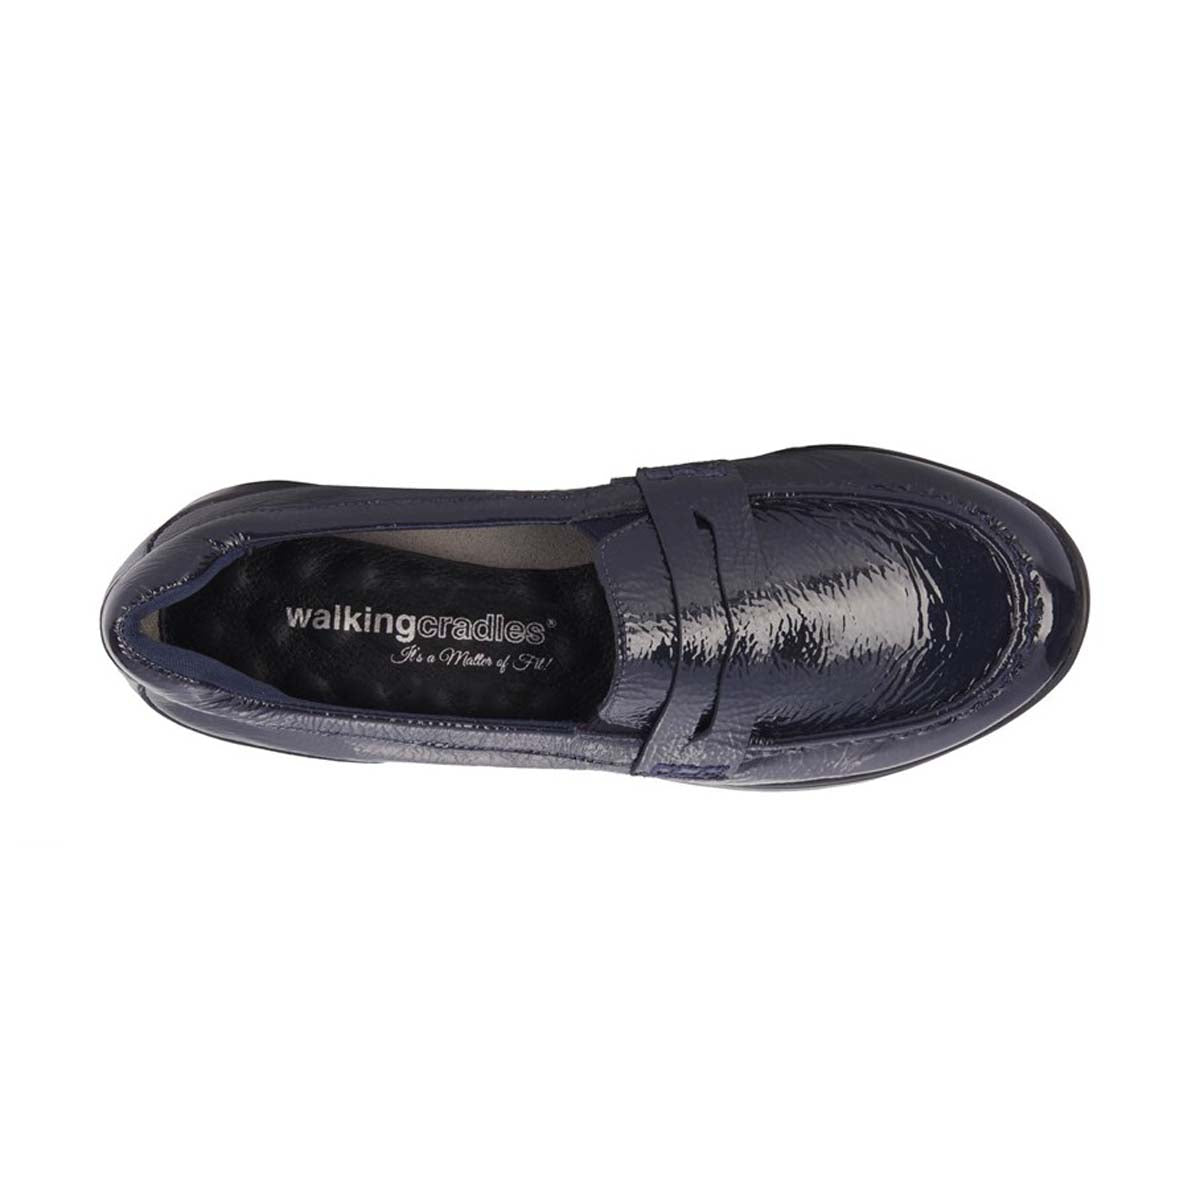 ROS HOMMERSON DANNON WOMEN'S LOAFER SLIP-ON SHOES IN NAVY - TLW Shoes